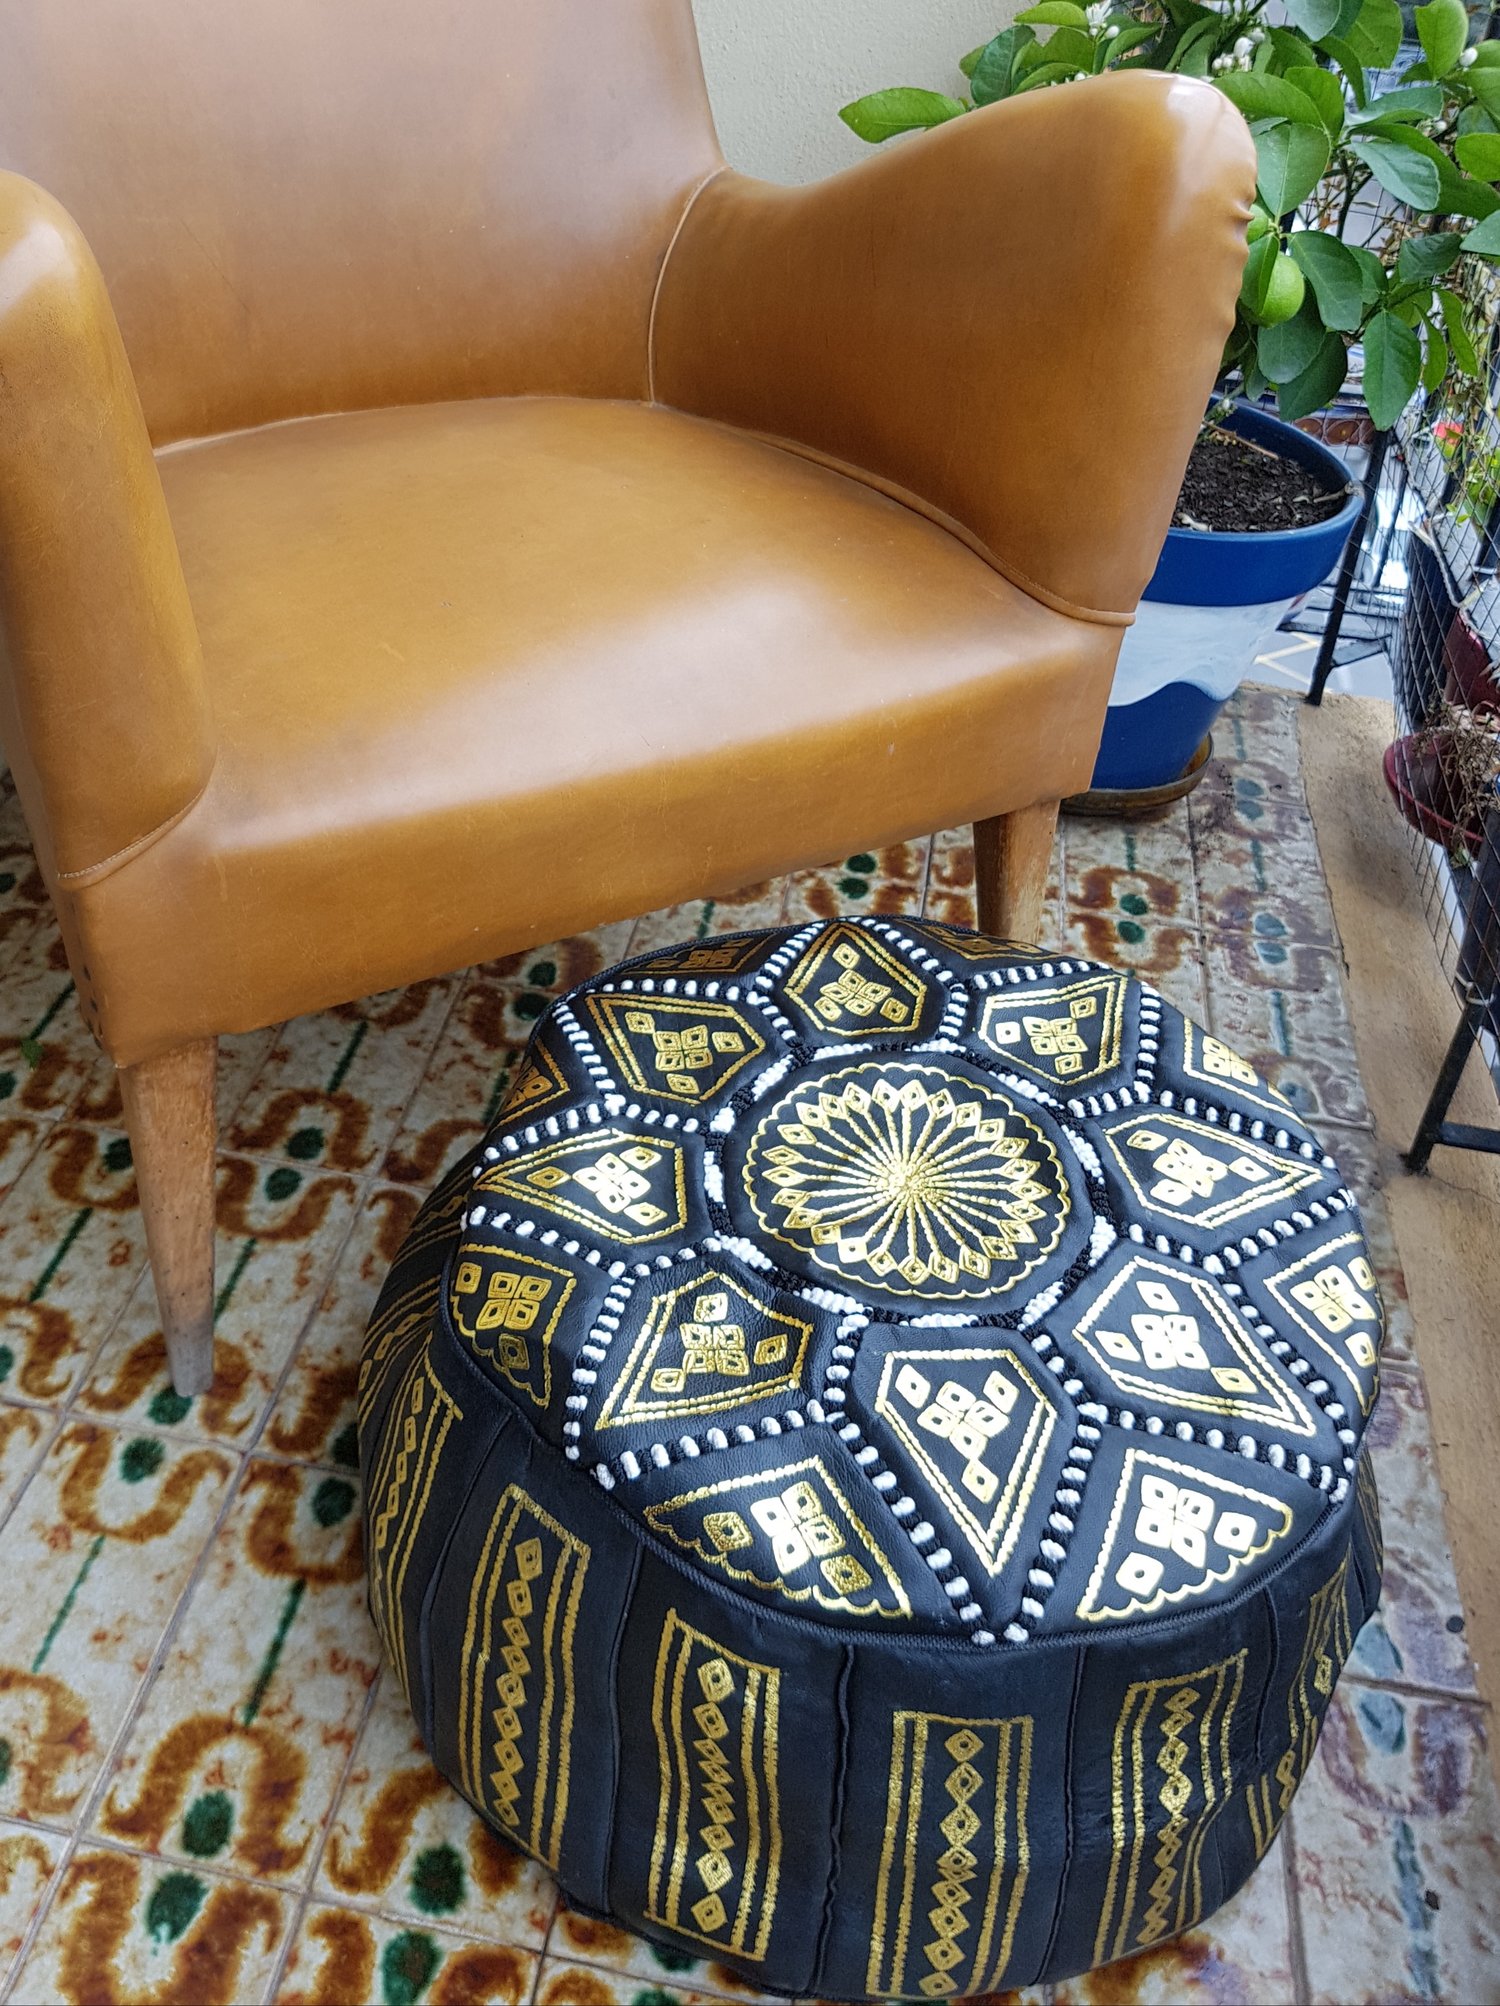 Moroccan Leather Pouf In Black White, Gold Leather Pouf